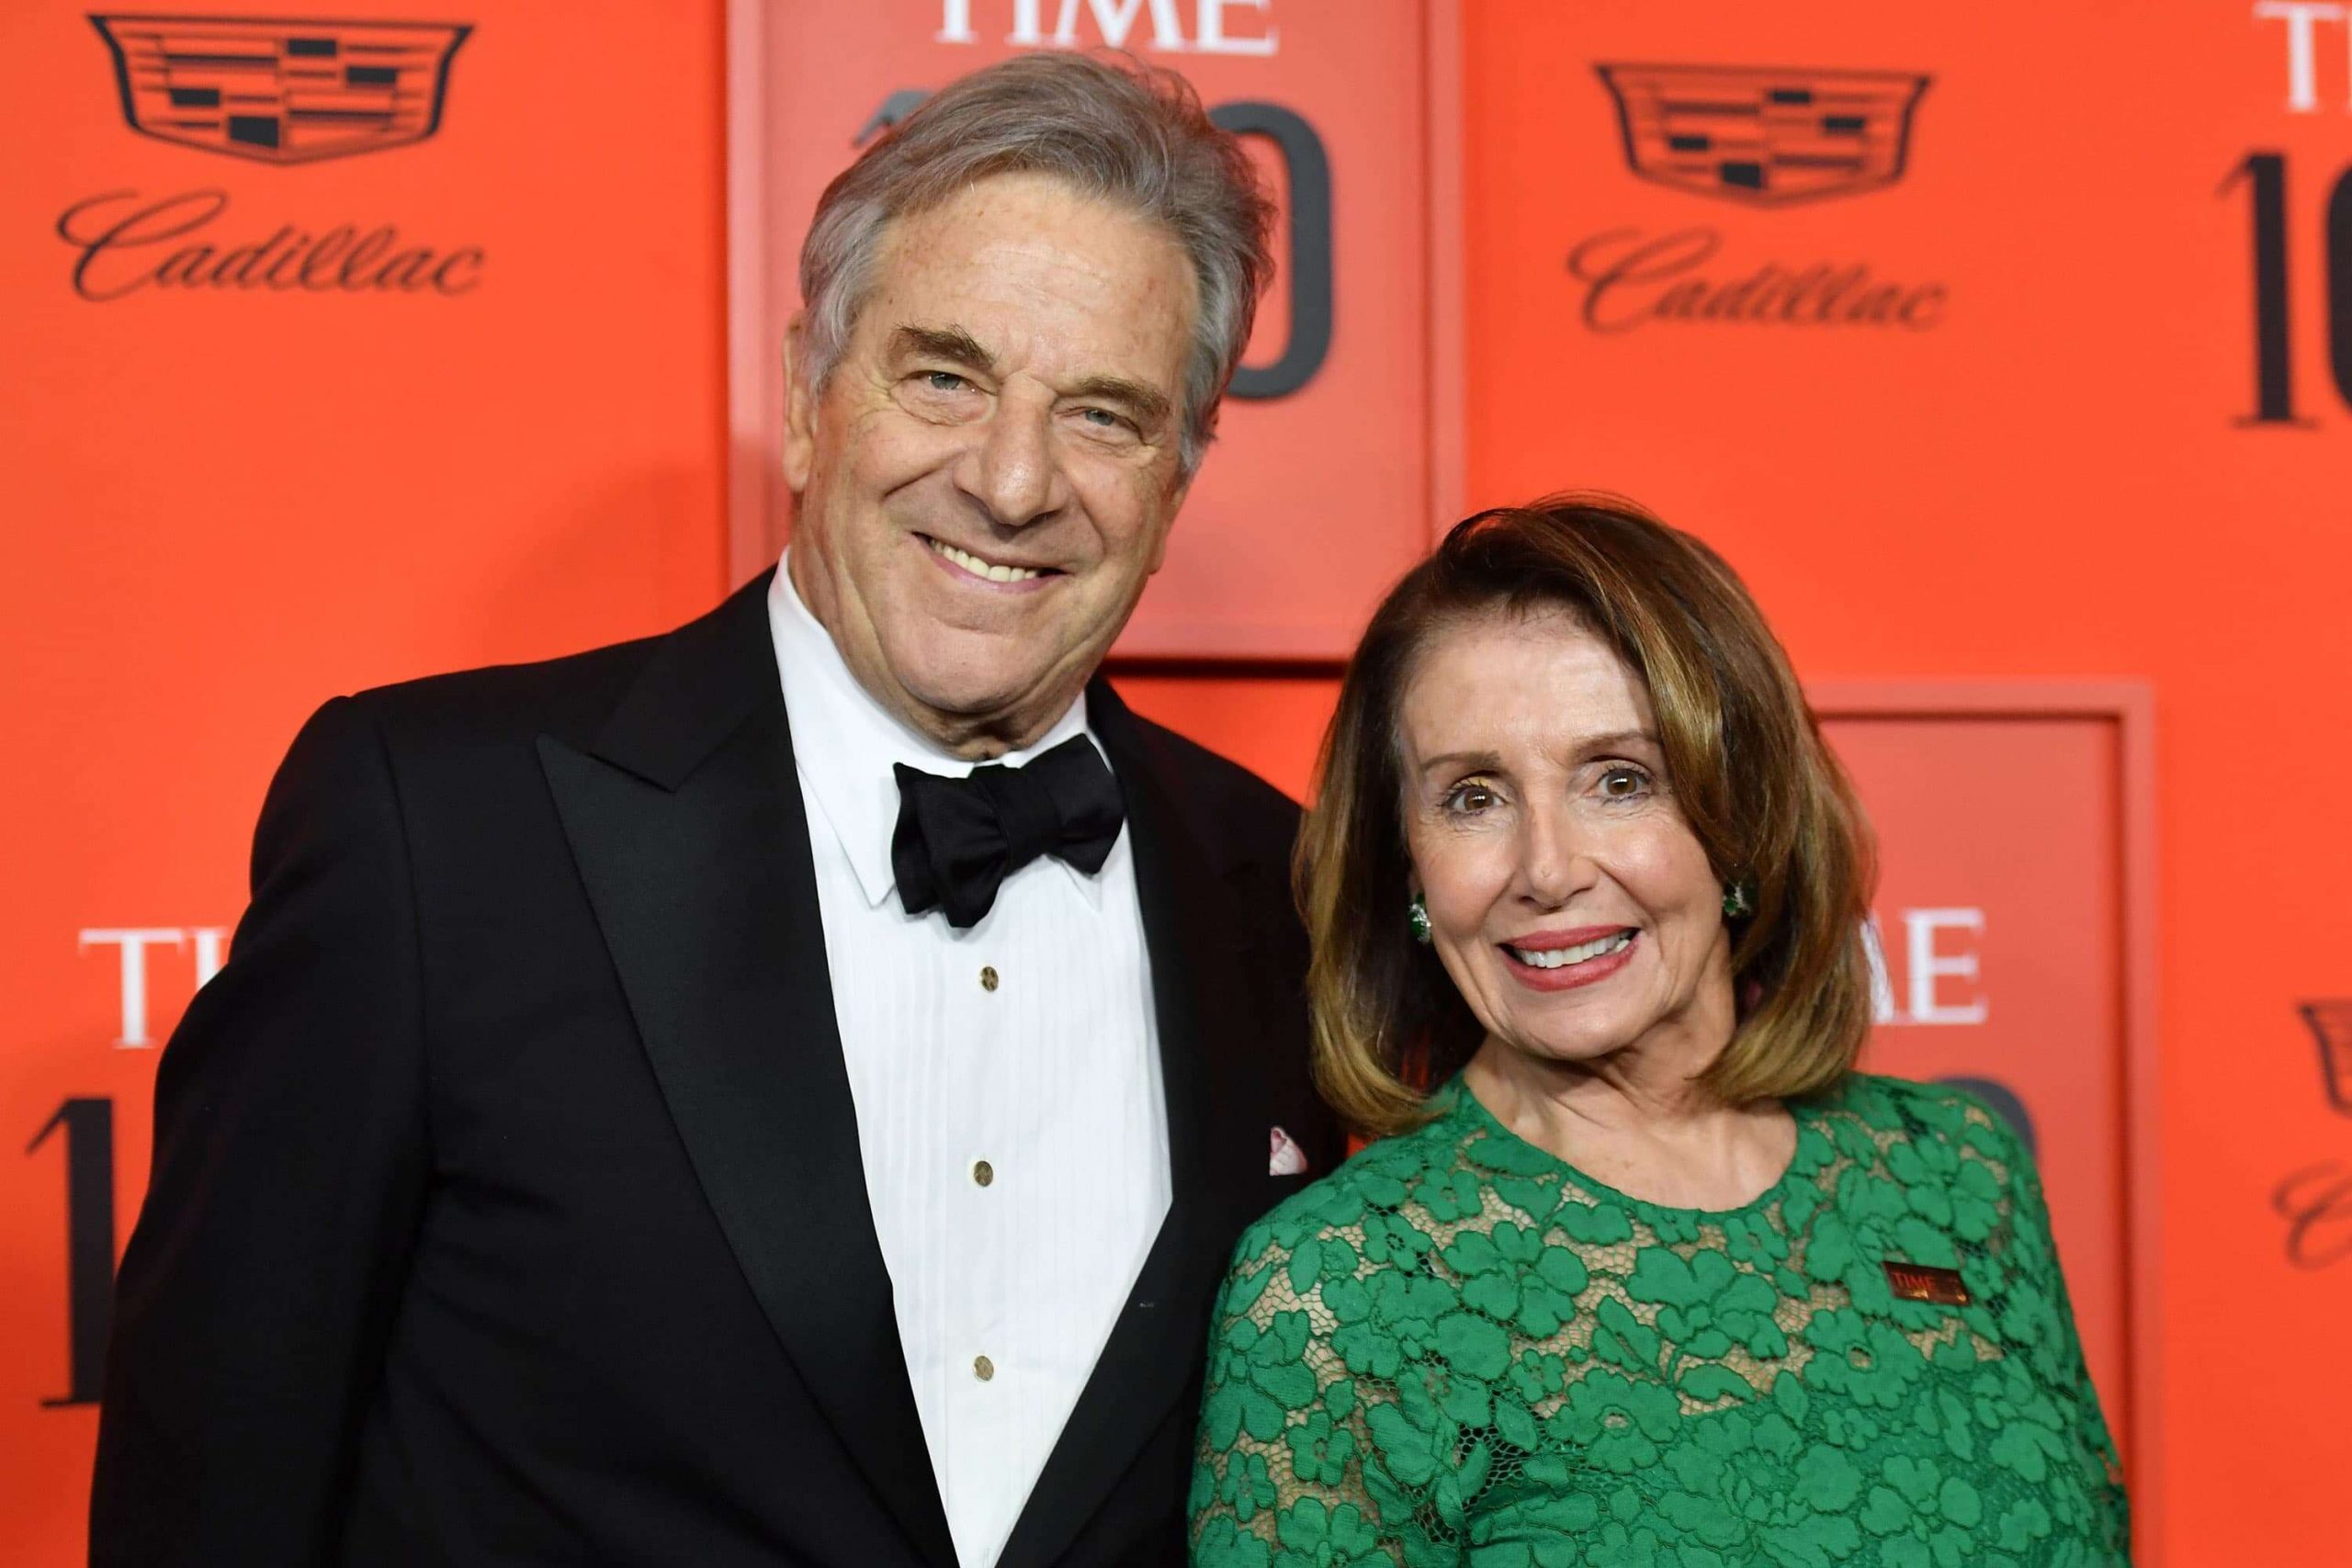 Nancy Pelosi criticized for her husband's actions and was charged with insider trading.